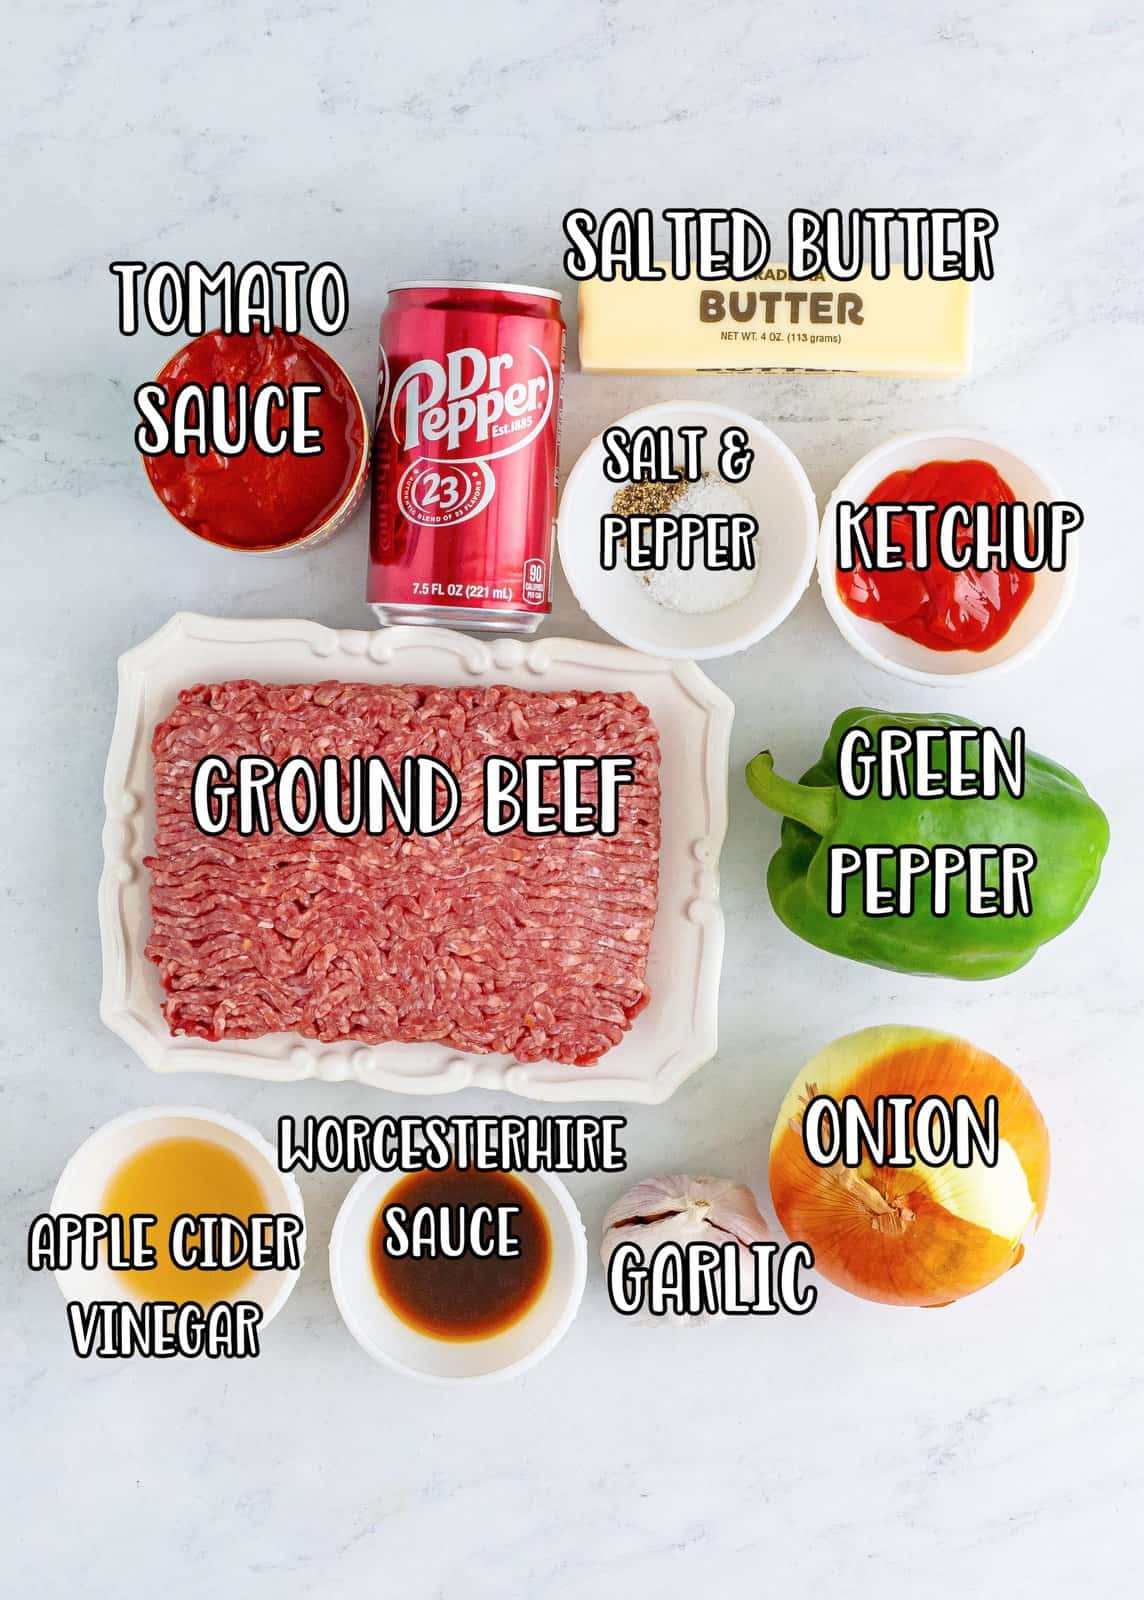 Lean ground beef, tomato sauce, ketchup, green pepper, onion, Dr Pepper soda in a can, butter, salt, pepper, Worcestershire sauce, garlic cloves, and apple cider vinegar.